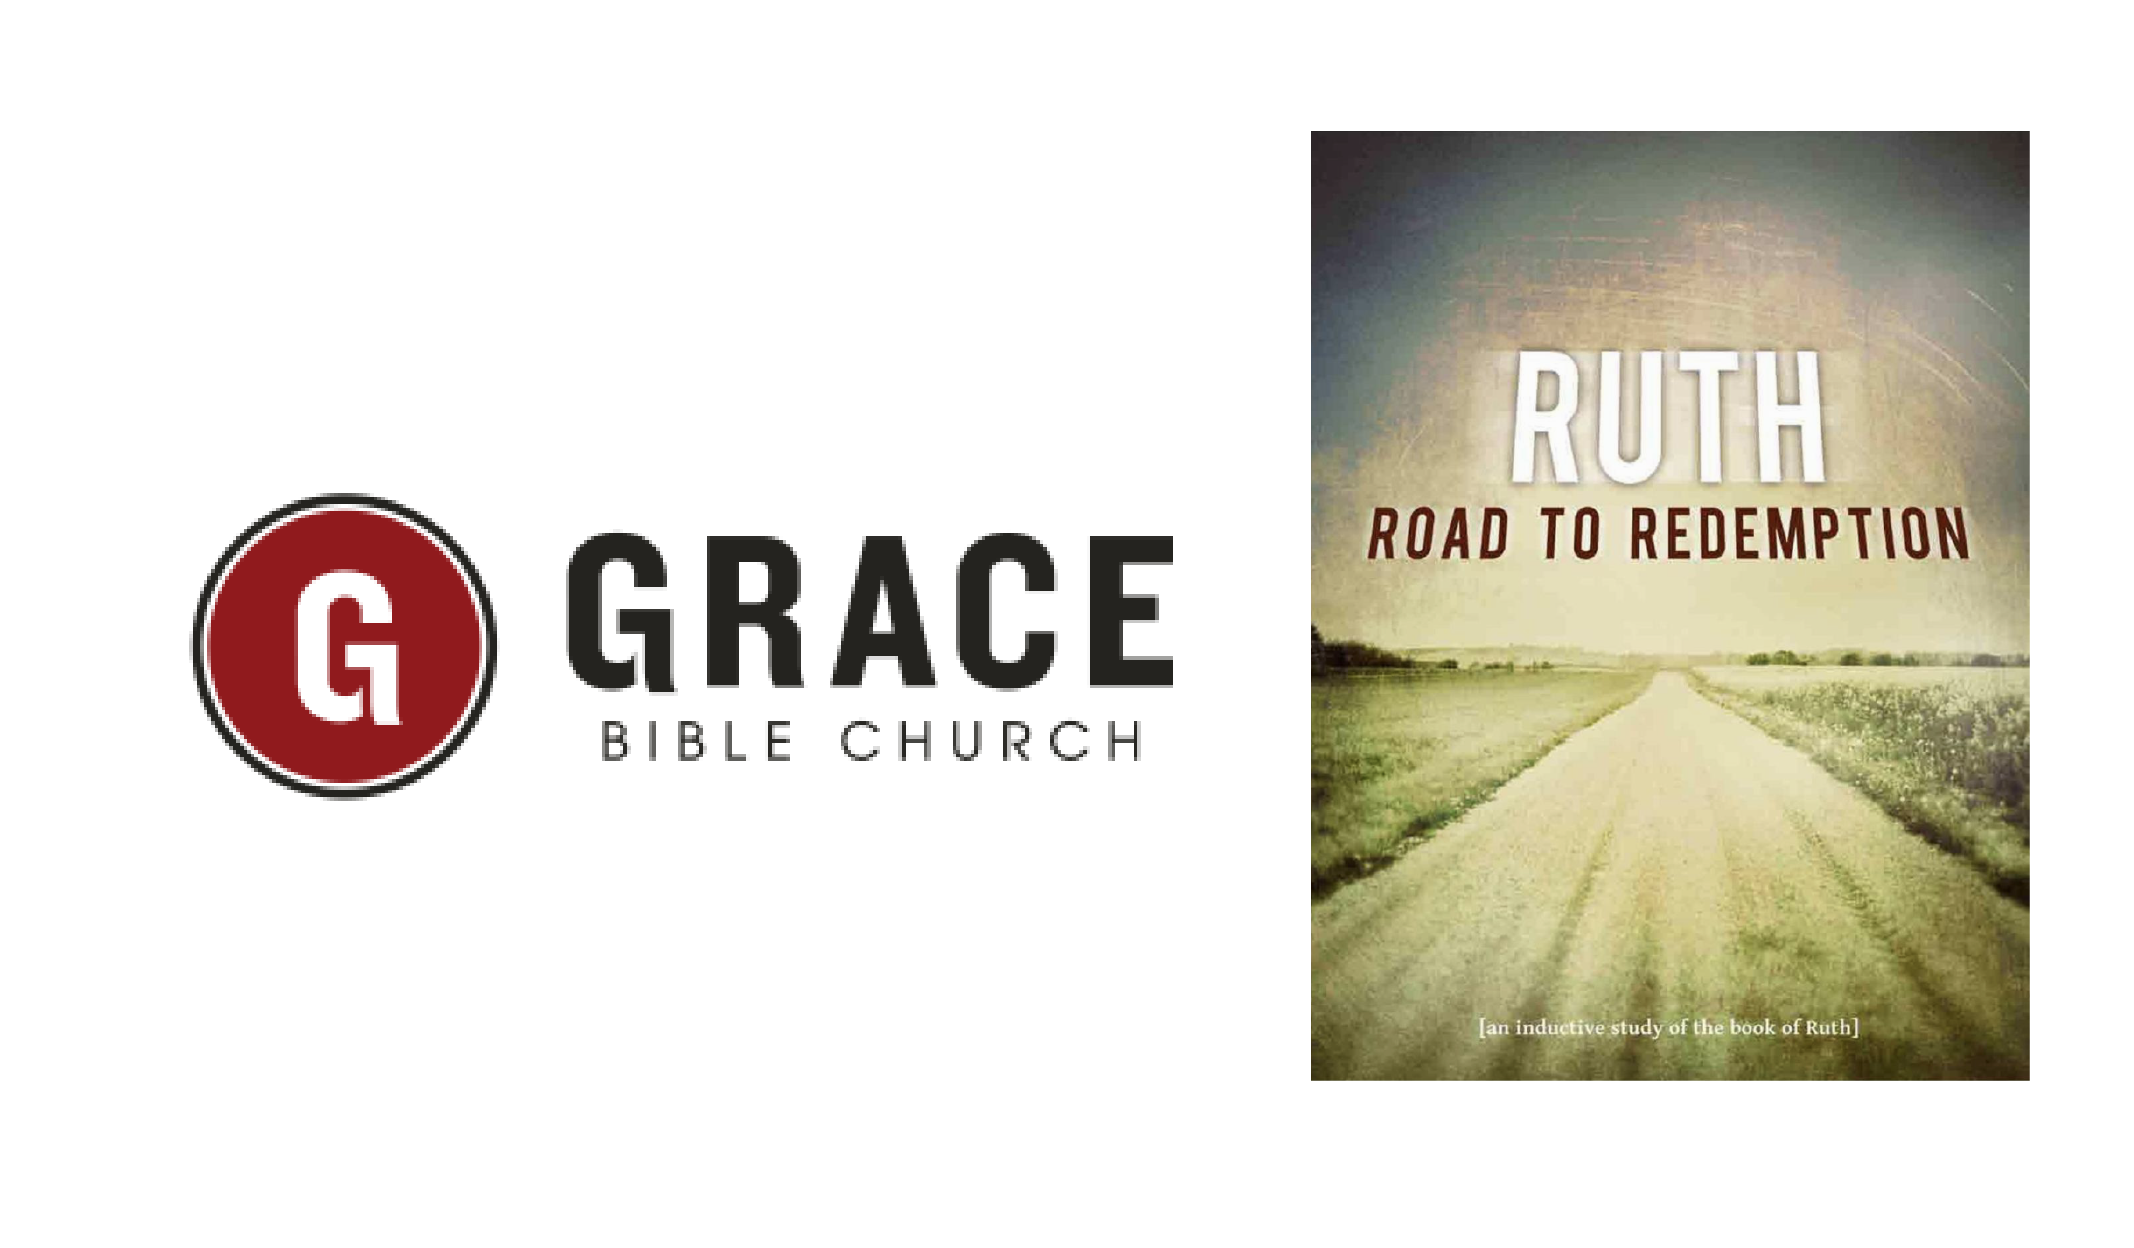 Ruth – Road to Redemption